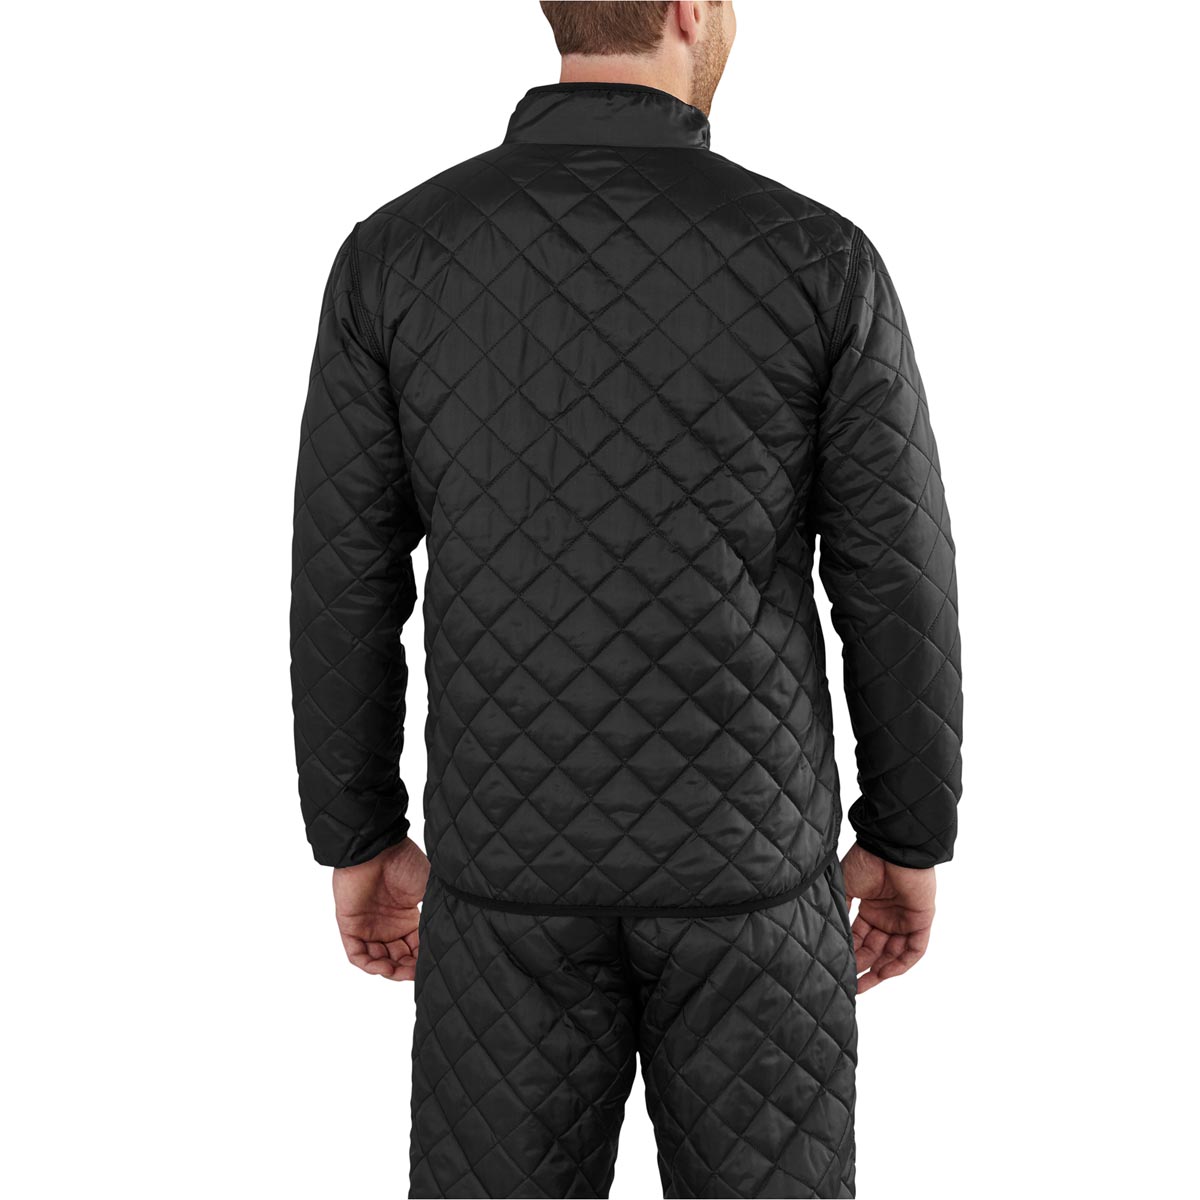 Carhartt Men's Yukon Quilted Base Layer Top